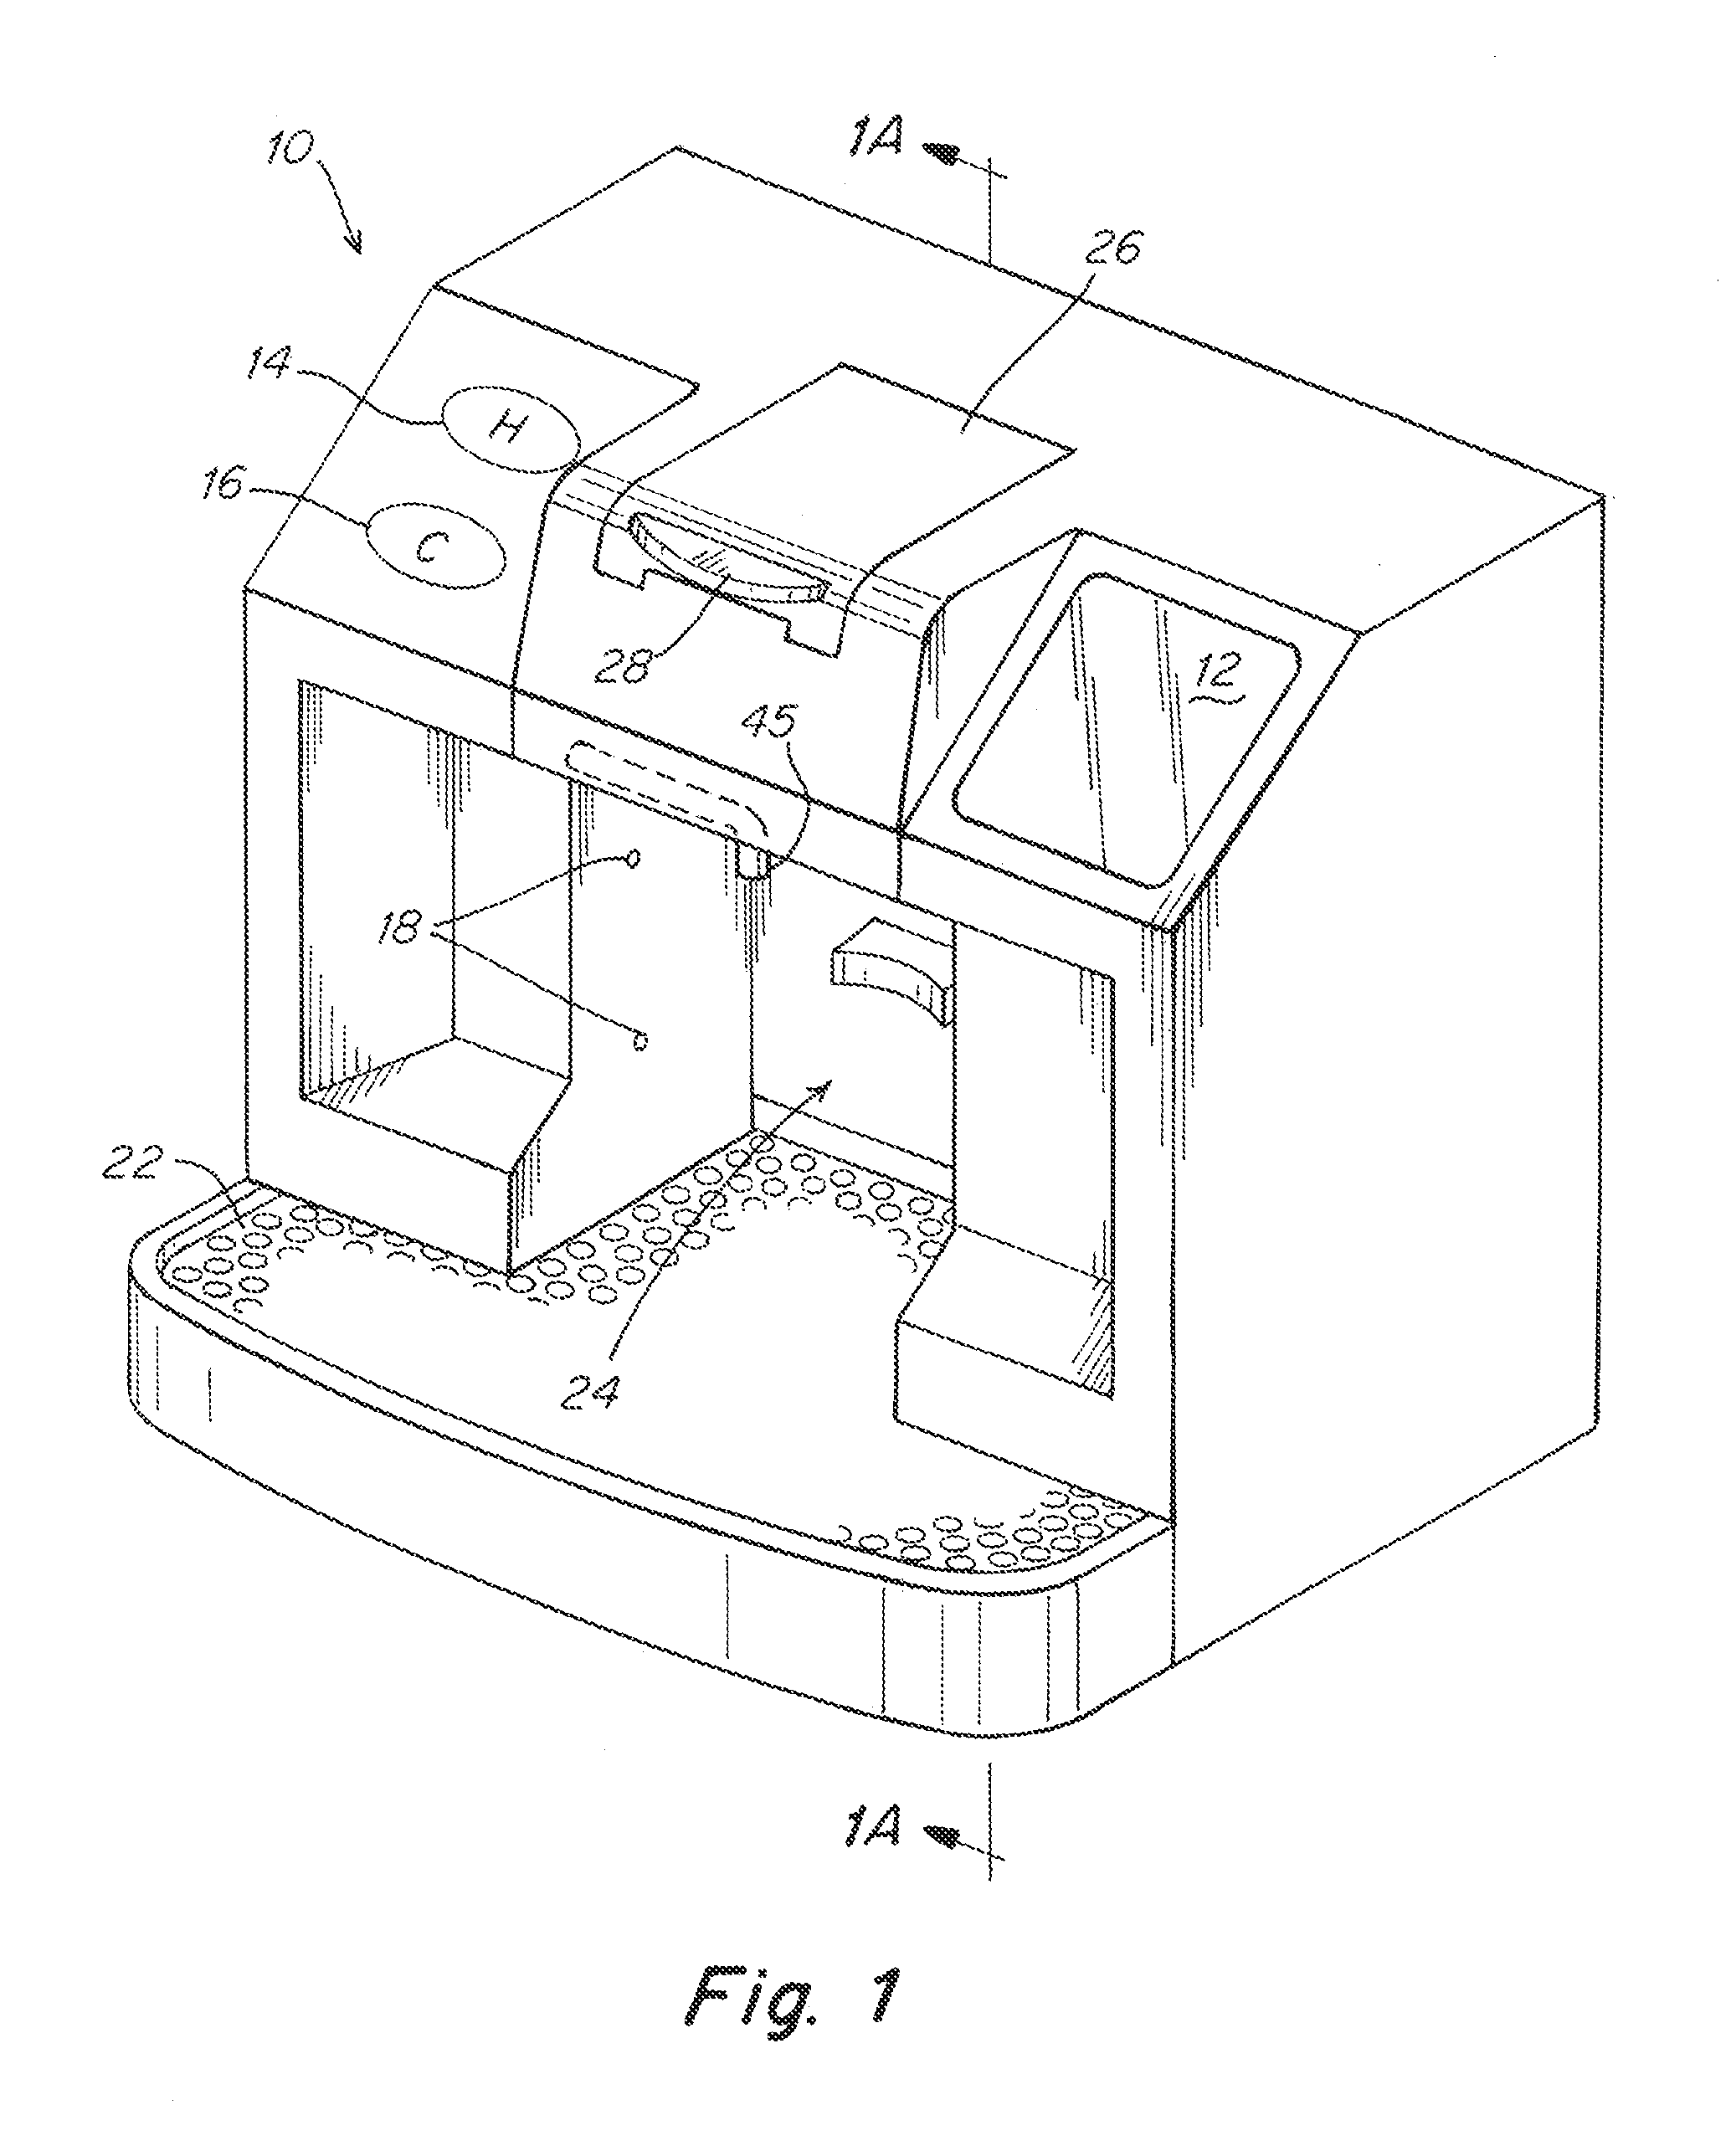 Capsule based system for preparing and dispensing a beverage